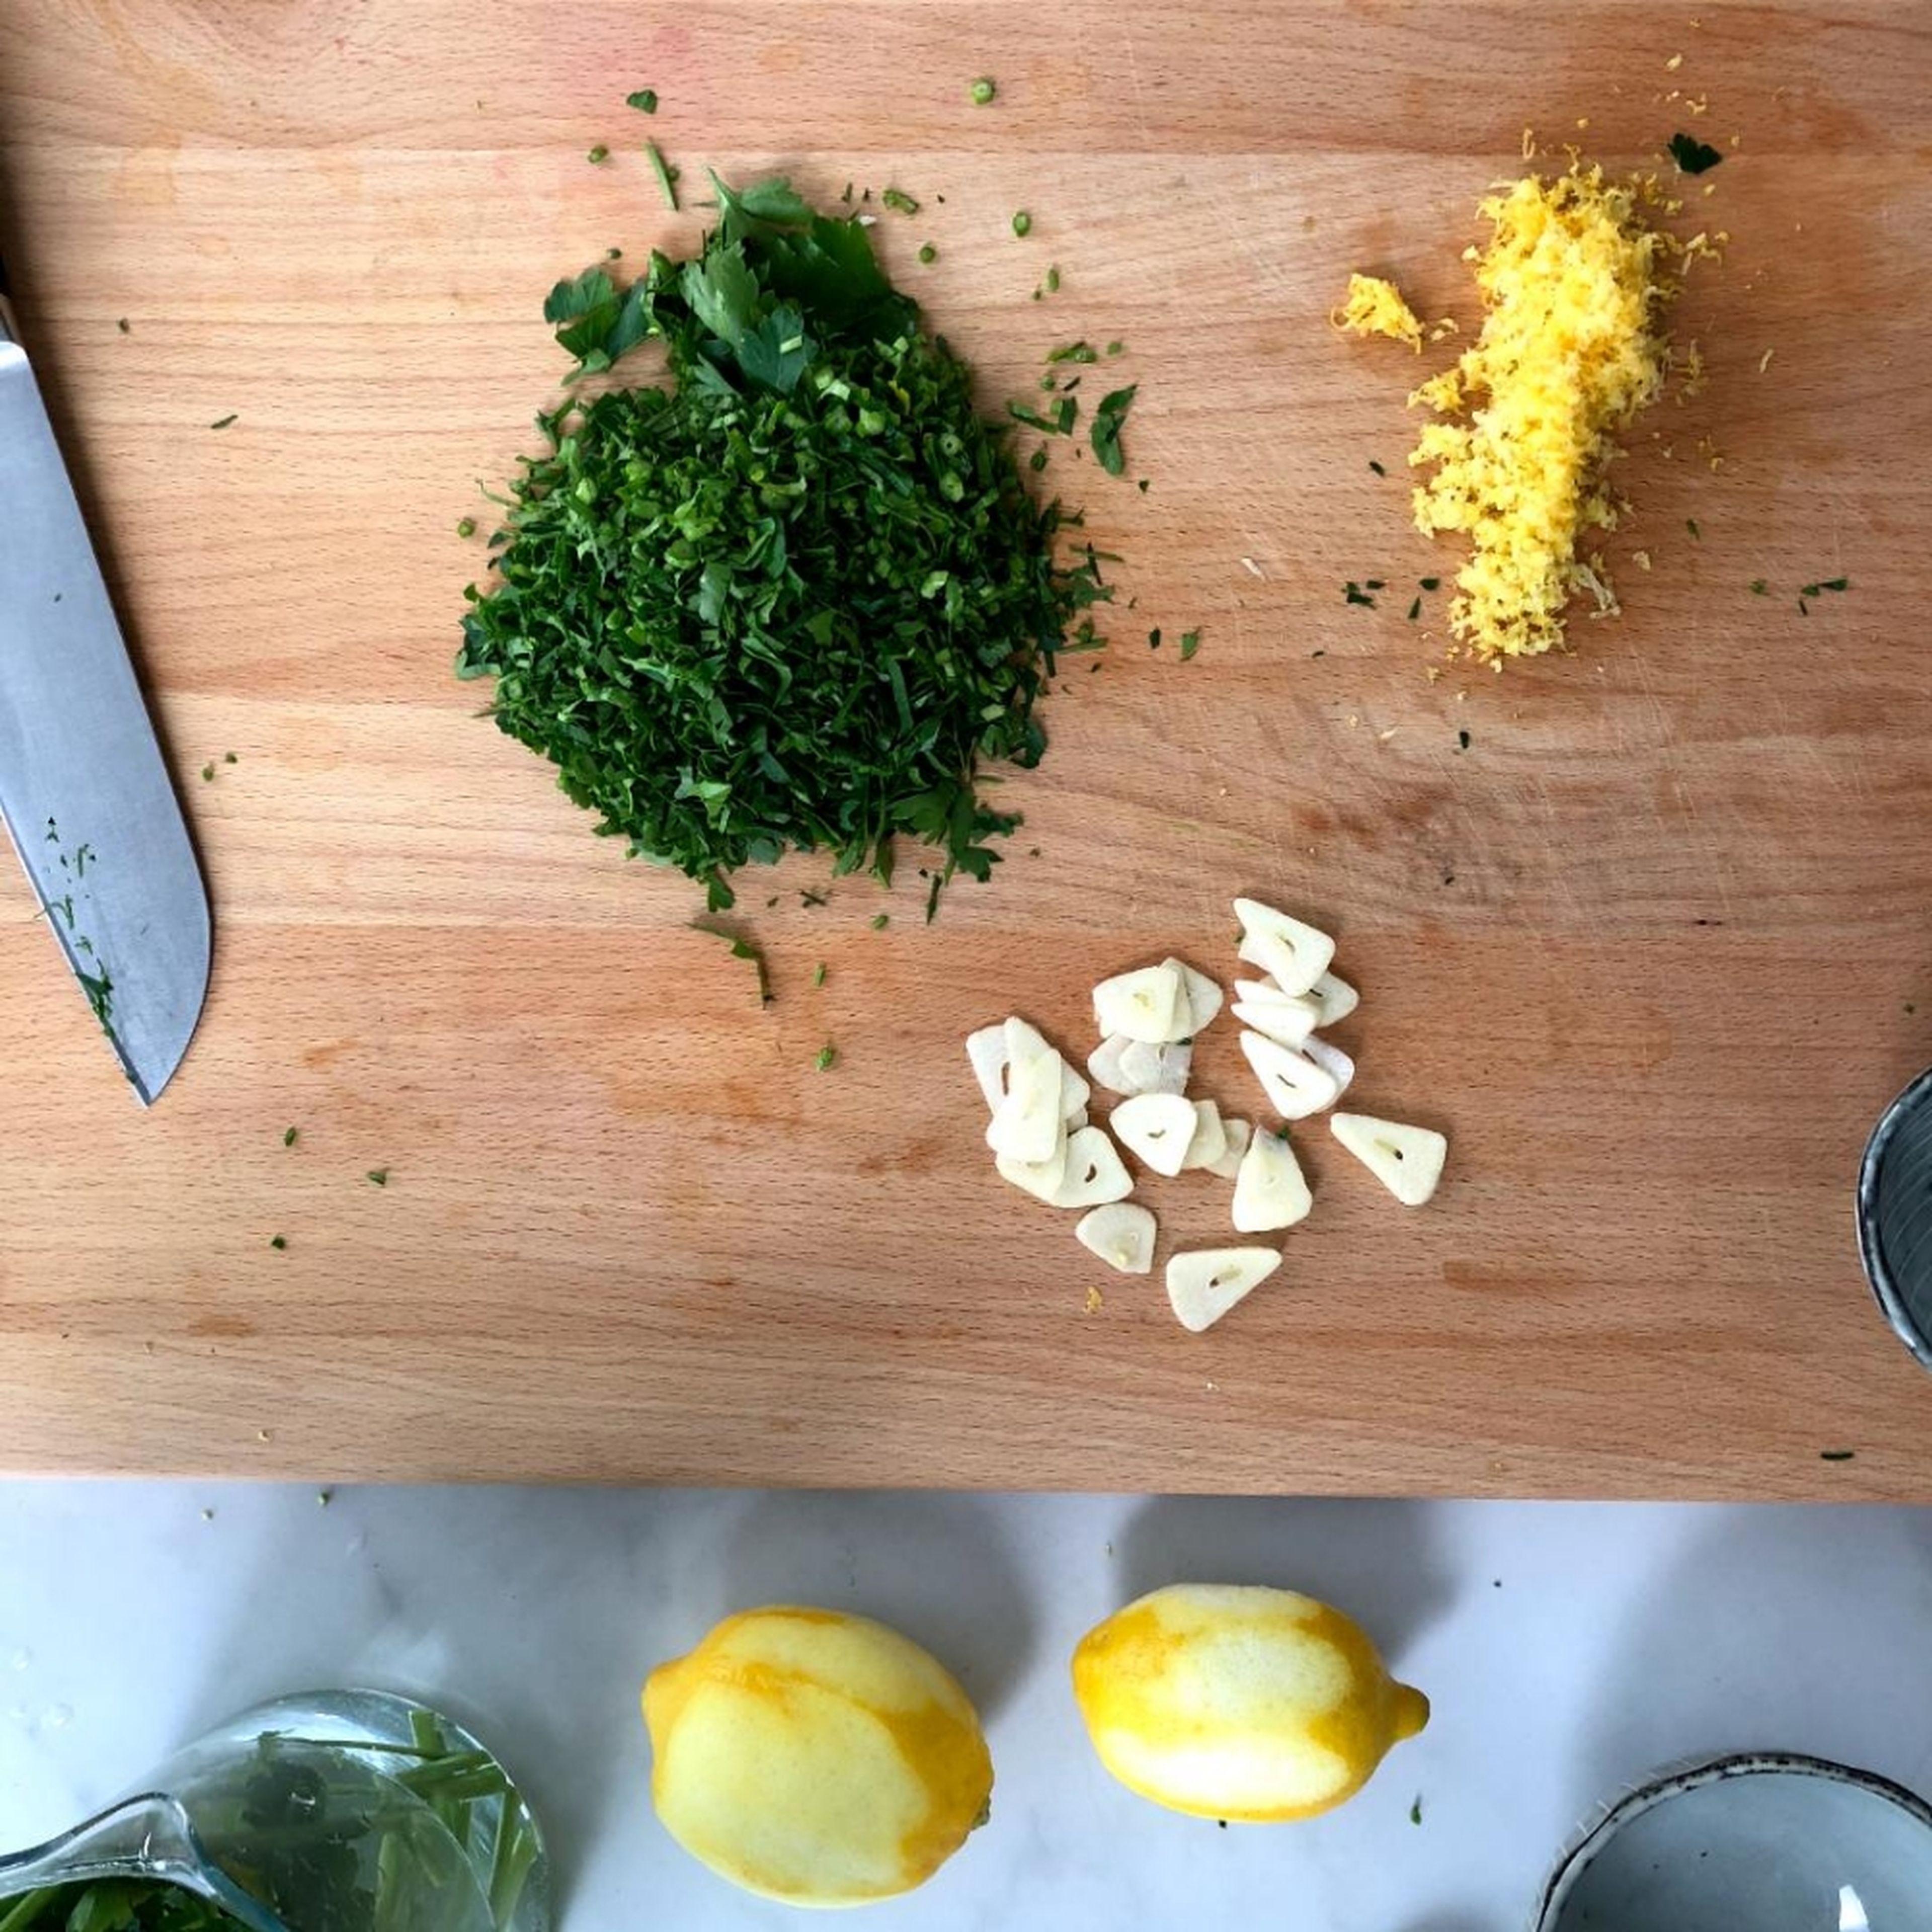 In the meantime, slice the remaining two cloves of garlic. Finely chop the parsley with stems. Grate the zest from the lemons.